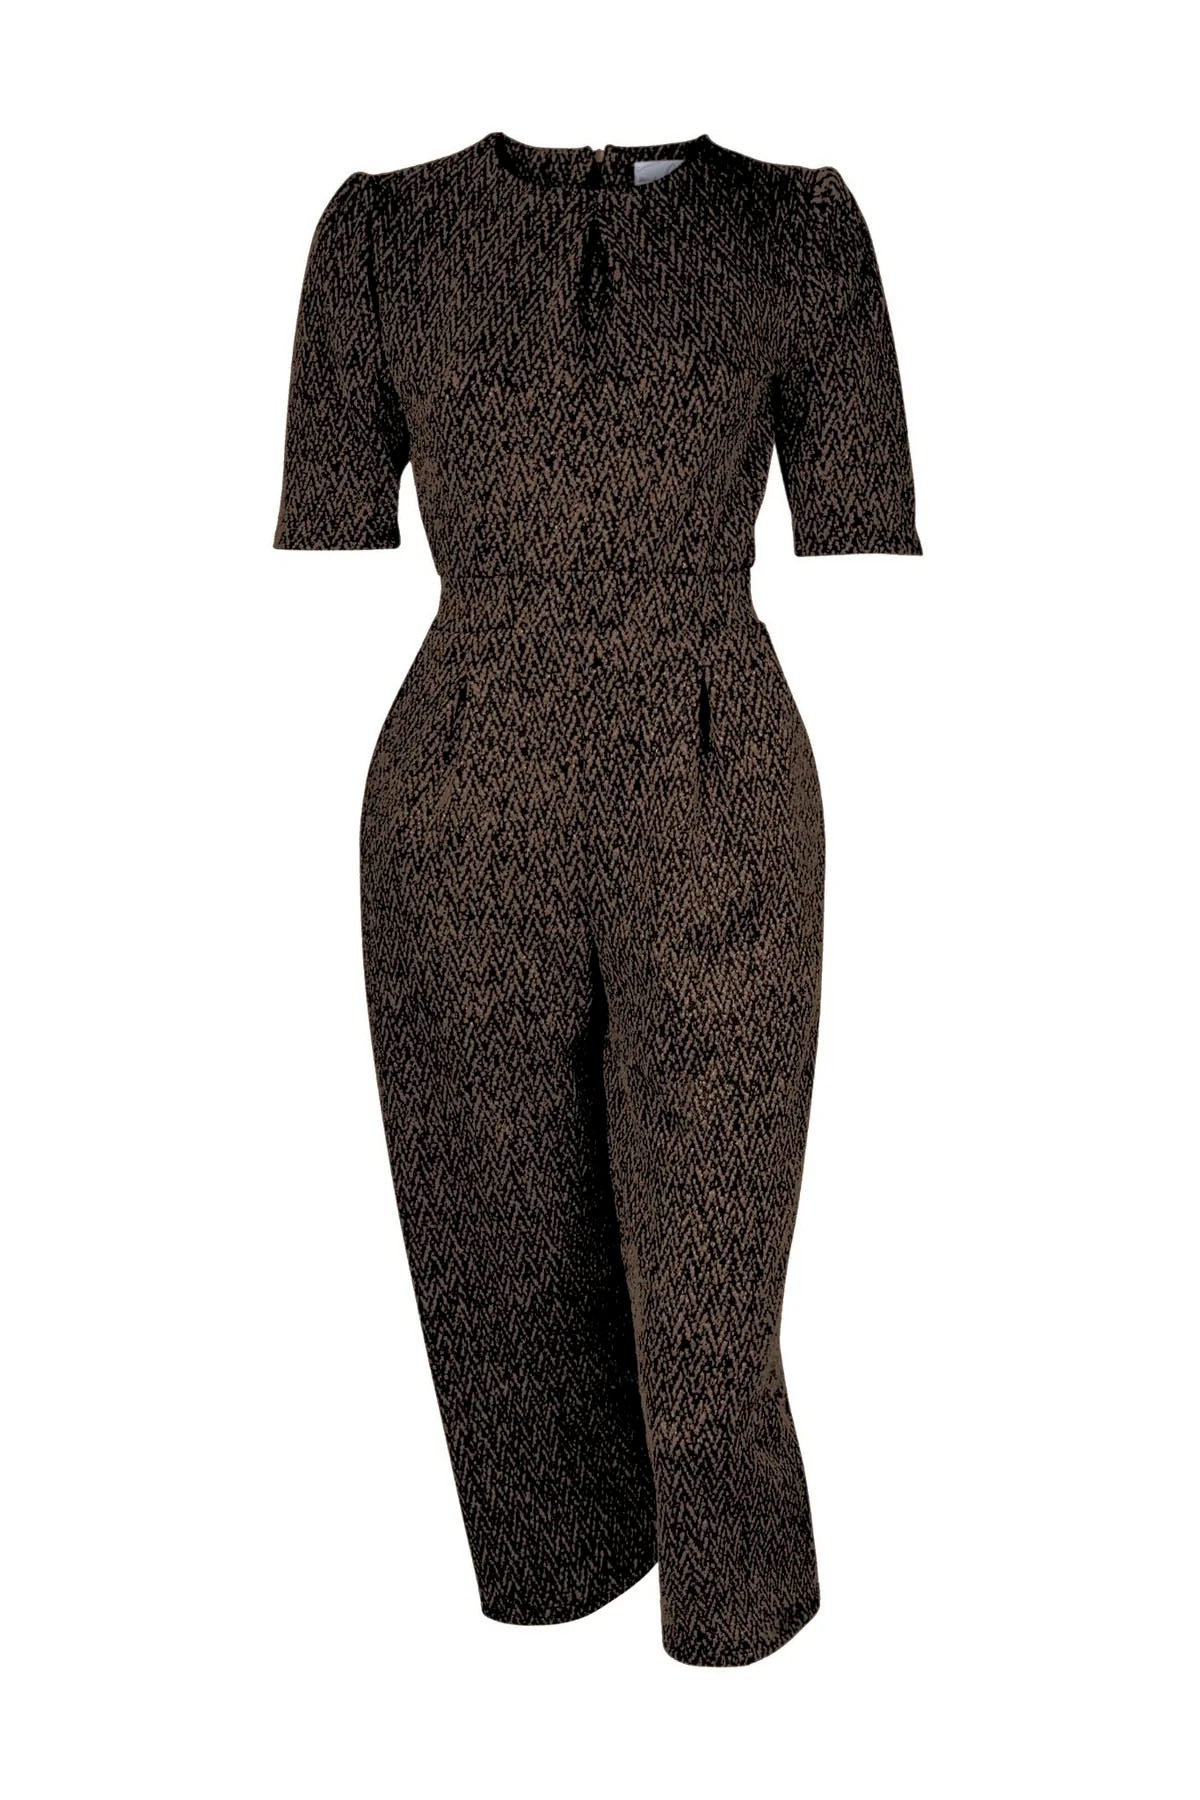 Herman Jumpsuit by Melow, Black slightly puffed shoulders, elbow length sleeves, defined elastic waist, 7/8 length wide legs, zipper at back, side pockets, sizes XS to XXL, made in Montreal 